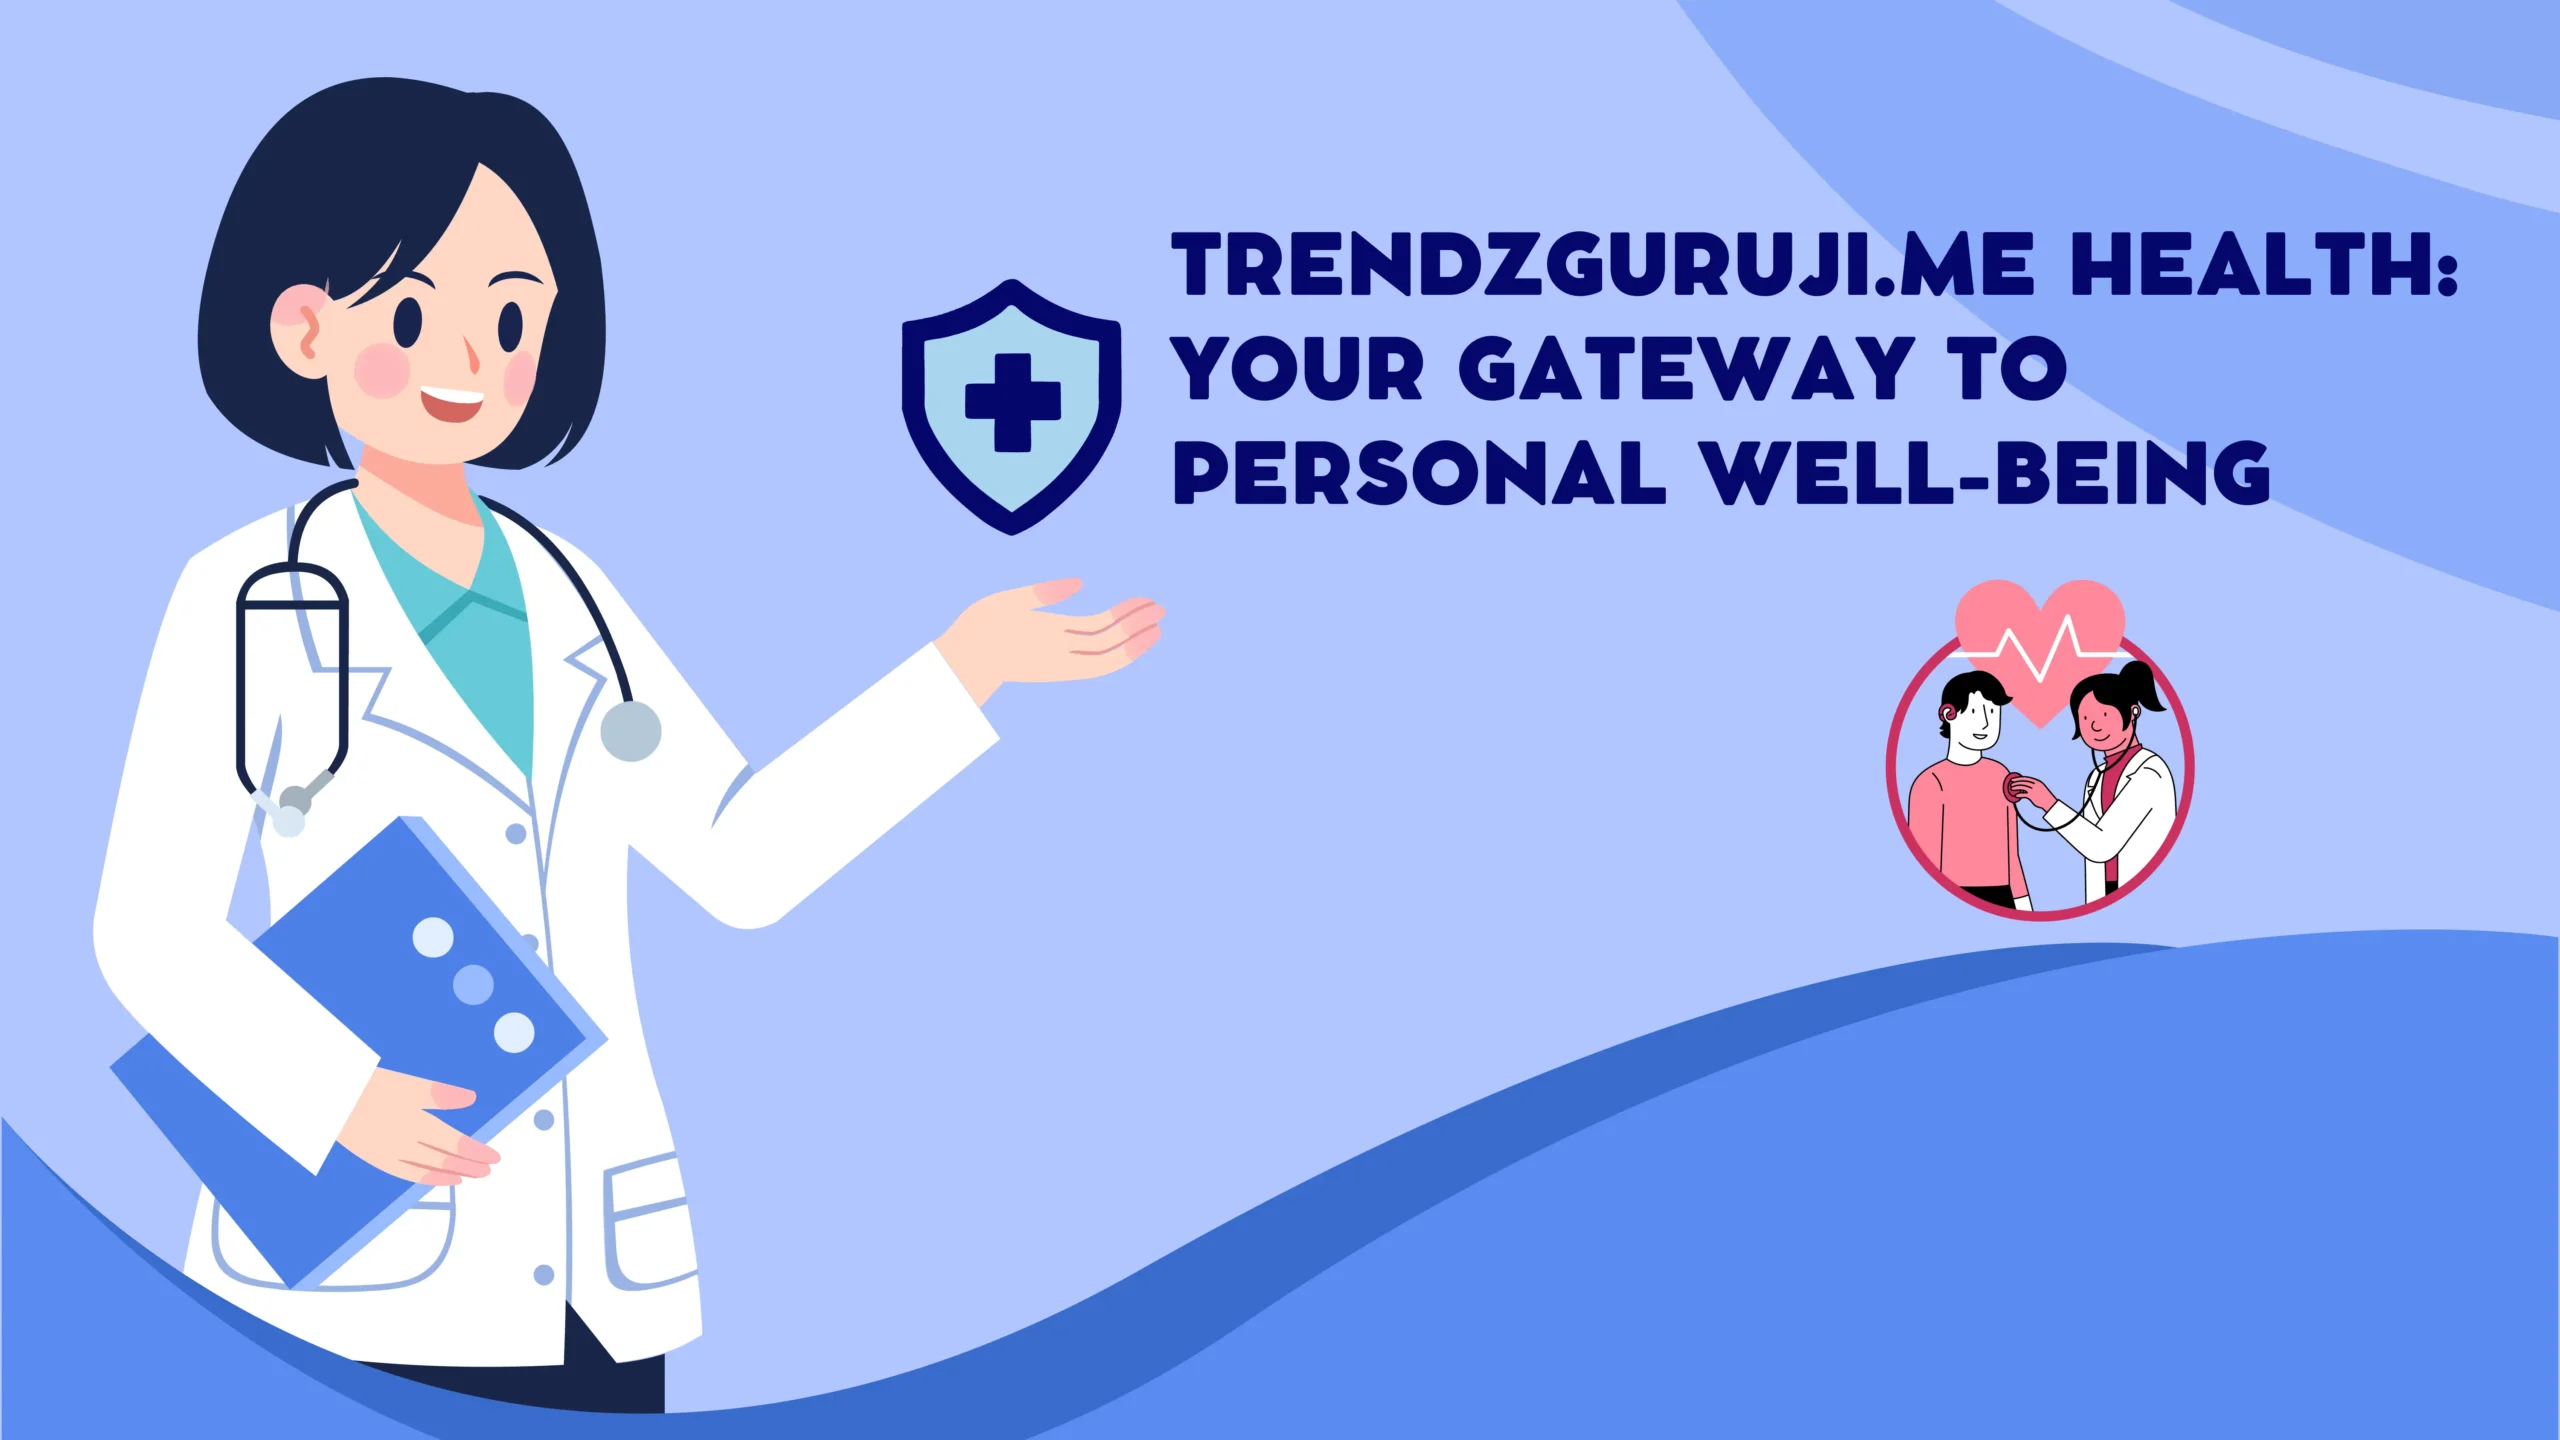 An image featuring the logo and branding of "Trendzguruji.me Health" with the tagline "Your Gateway to Personal Well-Being". On the left, there's a character depicting a healthcare professional, possibly a doctor, holding a clipboard and presenting the service. To the right, there's a heart-shaped graphic encompassing two people, symbolizing care and personal connection, possibly representing the patient-doctor relationship or support for personal health. The overall color scheme is calming with a predominance of blue, suggesting a serene and professional health care environment.